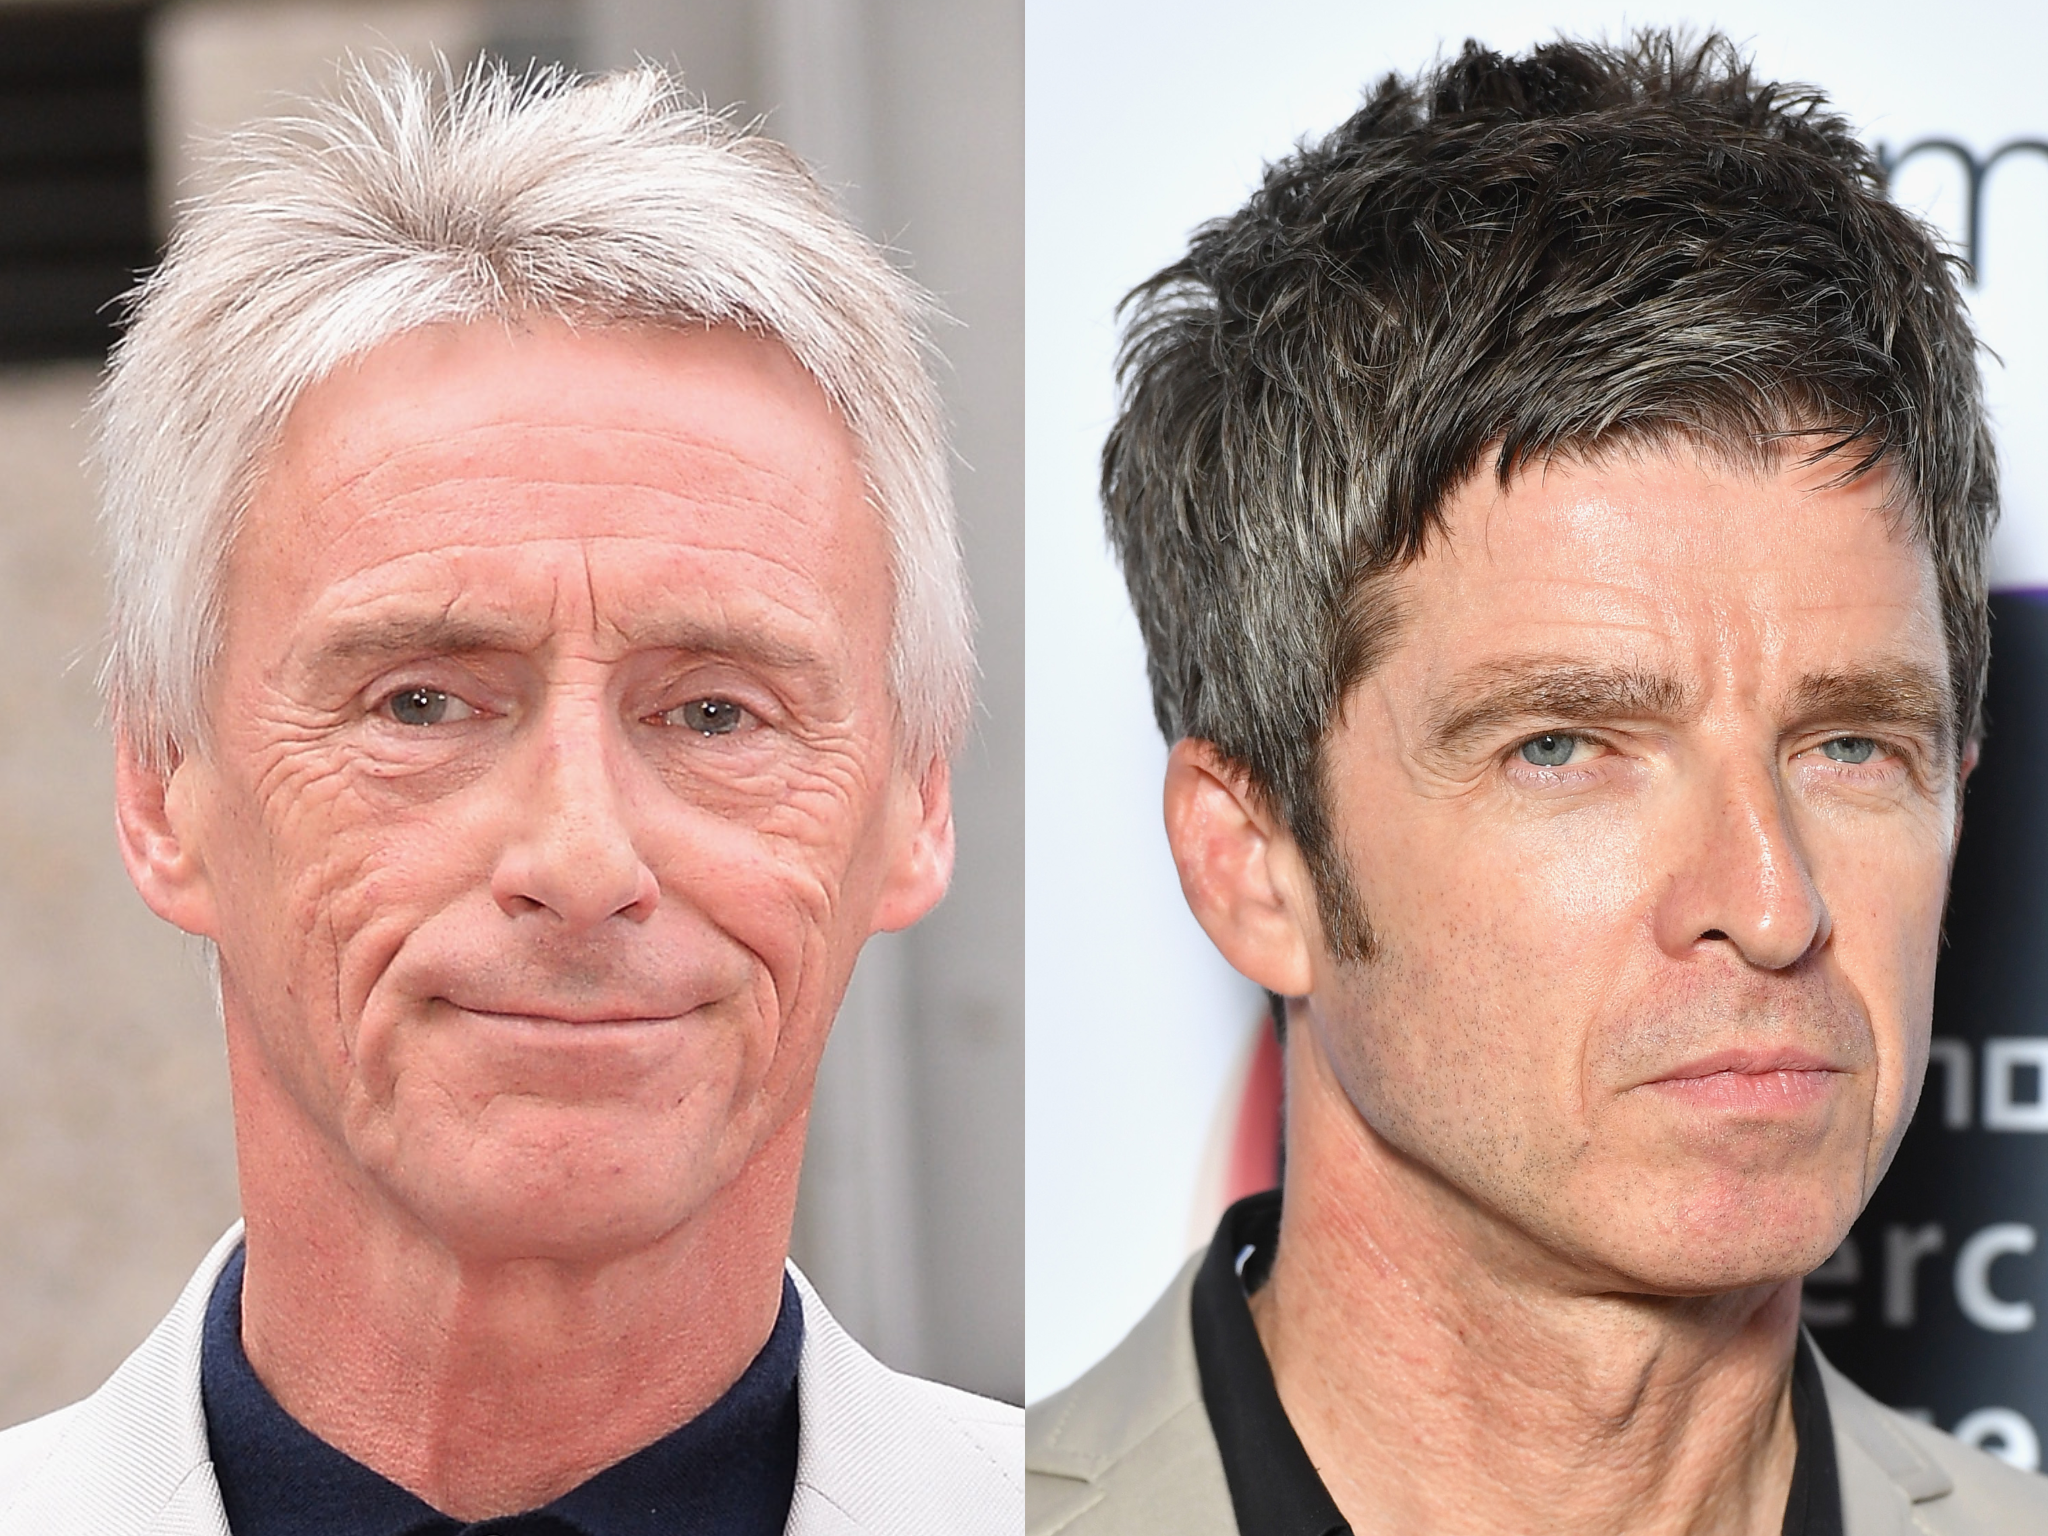 Paul Weller says he would &apos;never, ever&apos; give advice to Noel Gallagher thumbnail